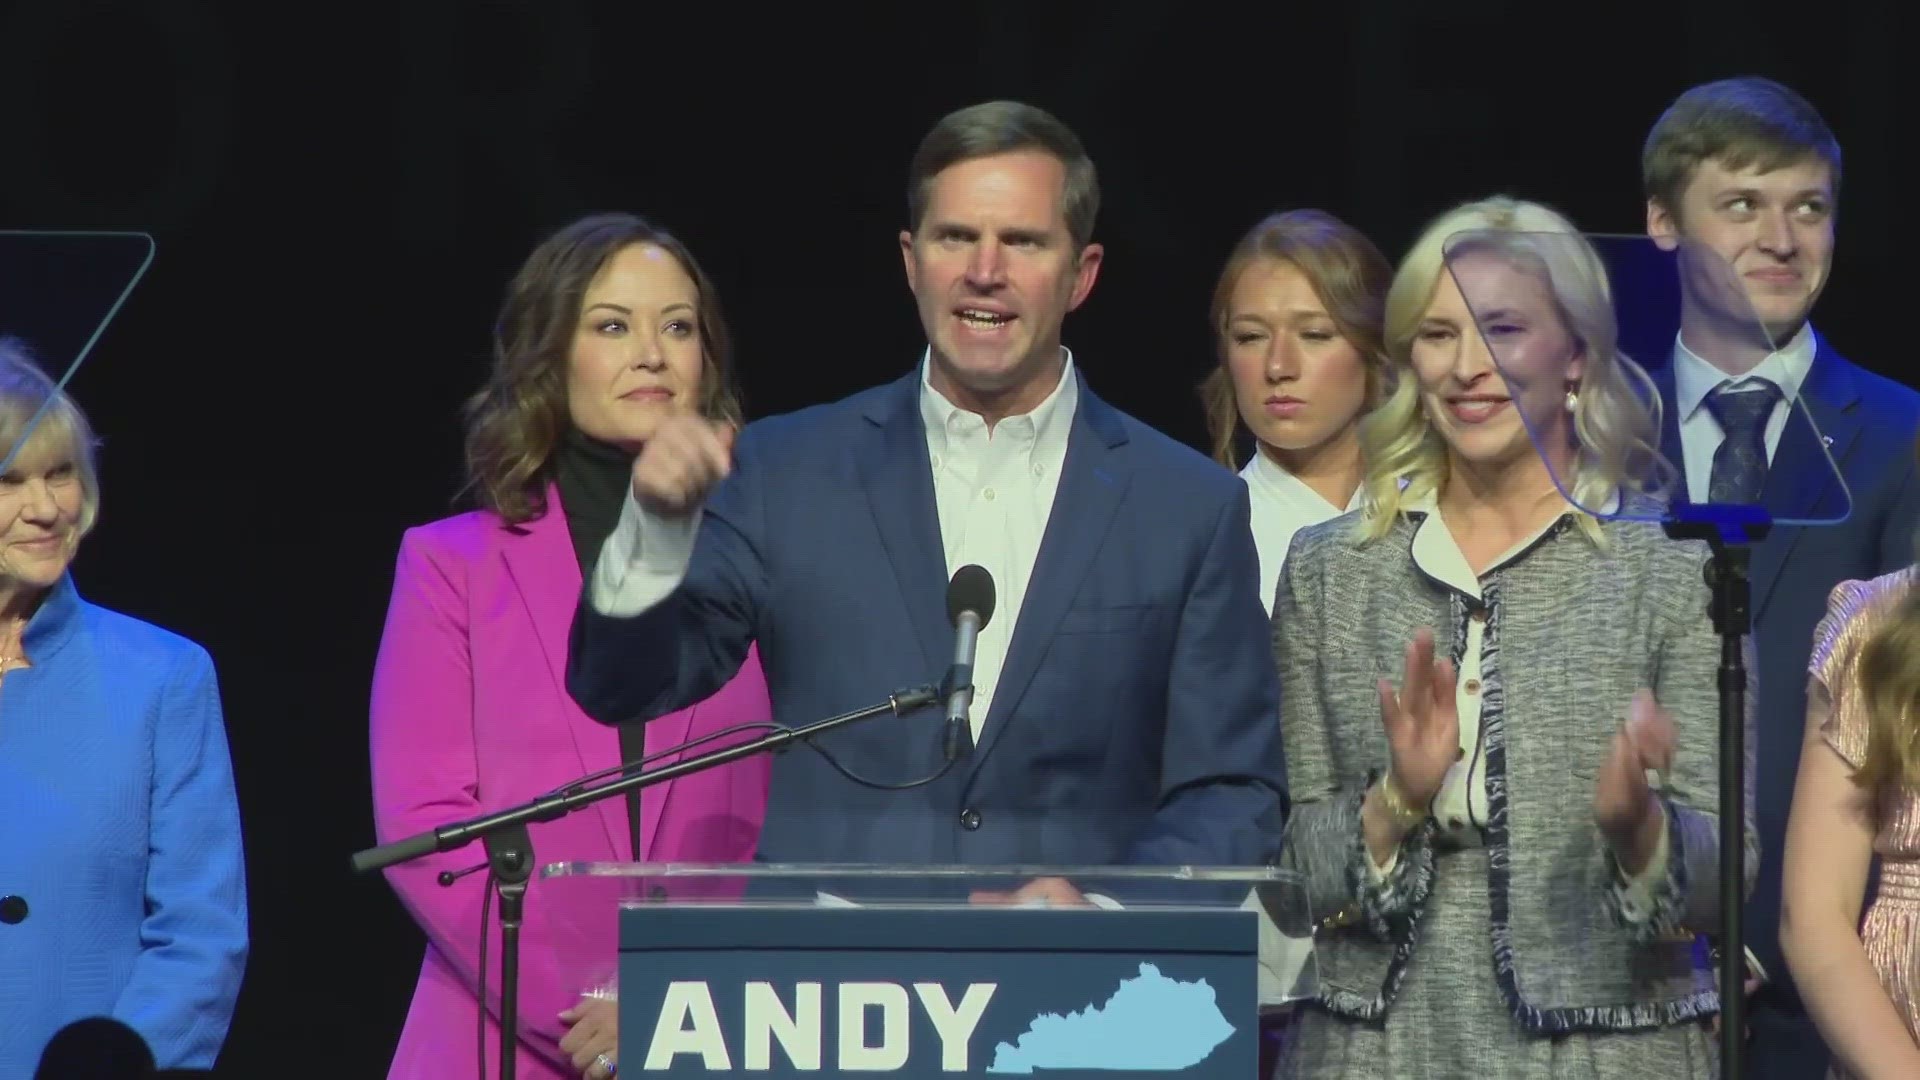 Beshear won by a wider margin than many of the polls predicted prior to Election Day.